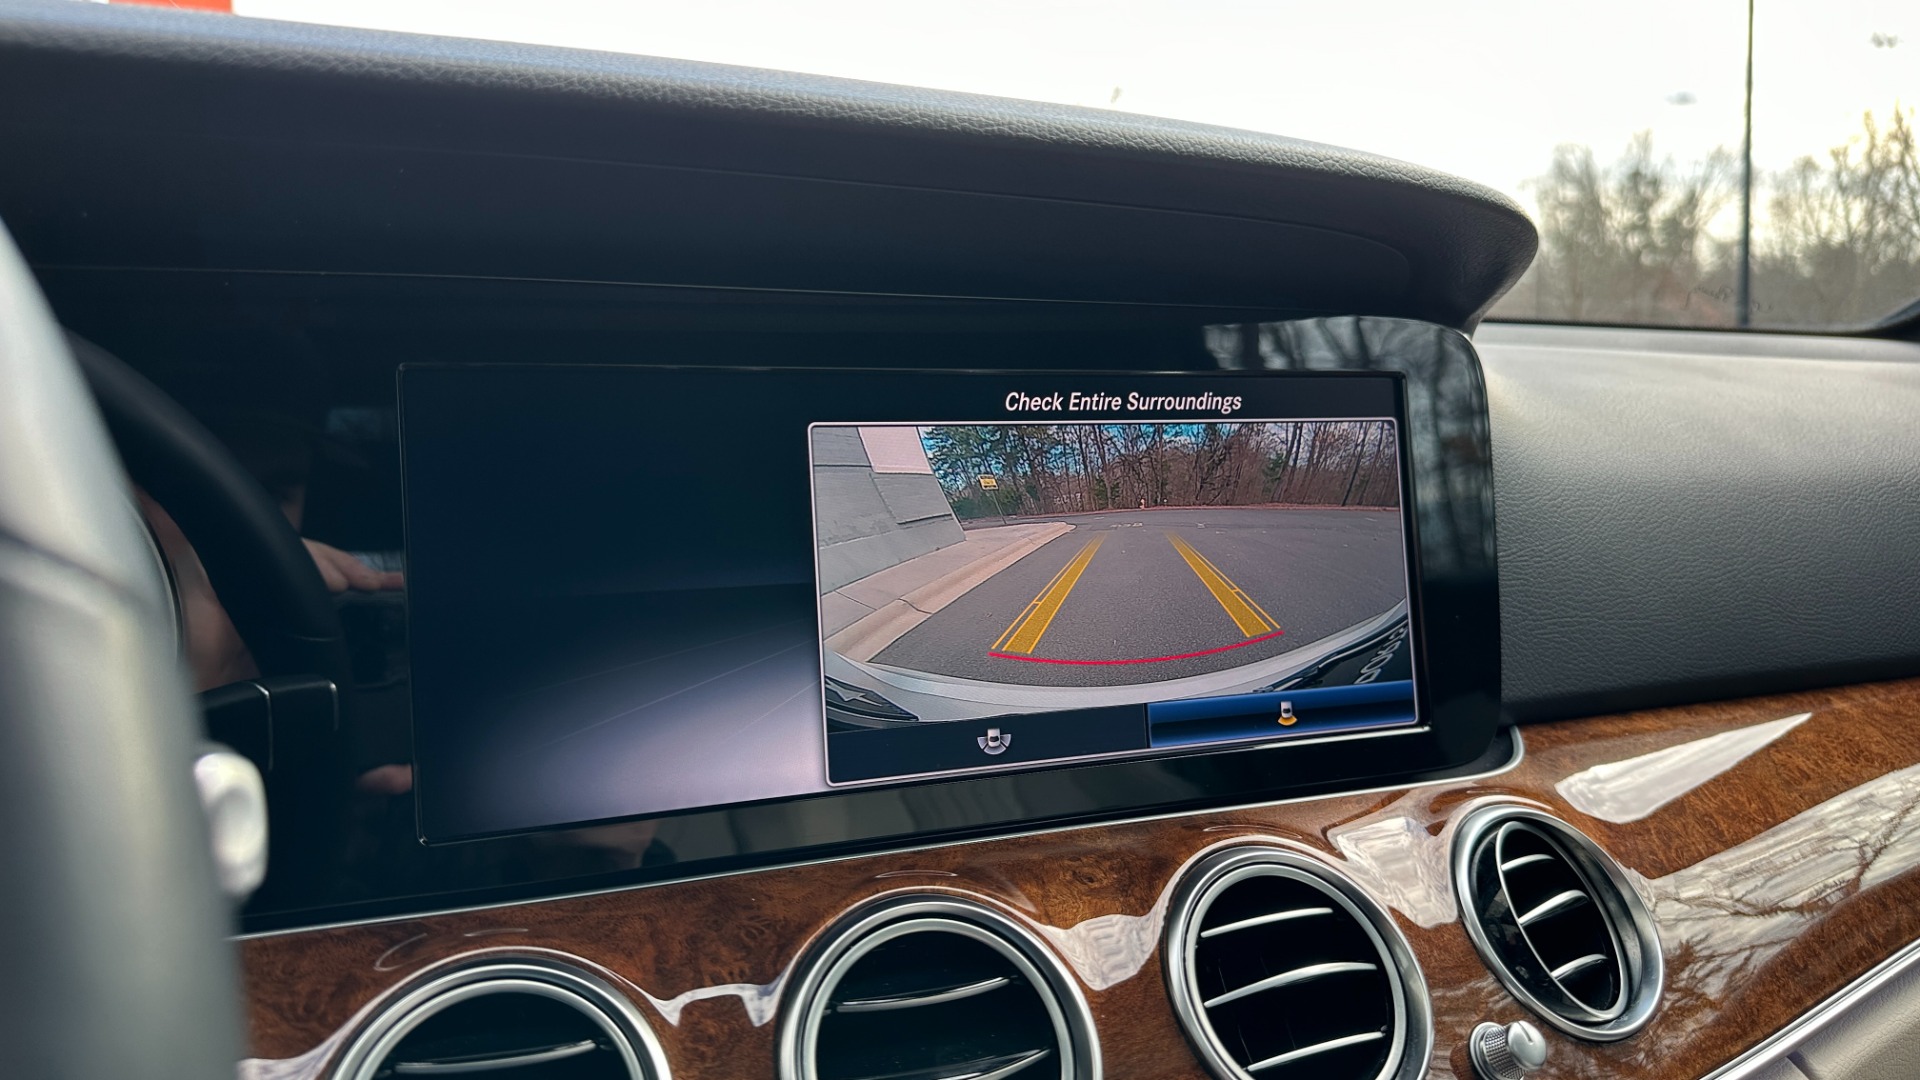 Used 2019 Mercedes-Benz E-Class E300 / PREMIUM PACKAGE / BLIND SPOT / BURMESTER SOUND / HEATED STEERING for sale $35,400 at Formula Imports in Charlotte NC 28227 29